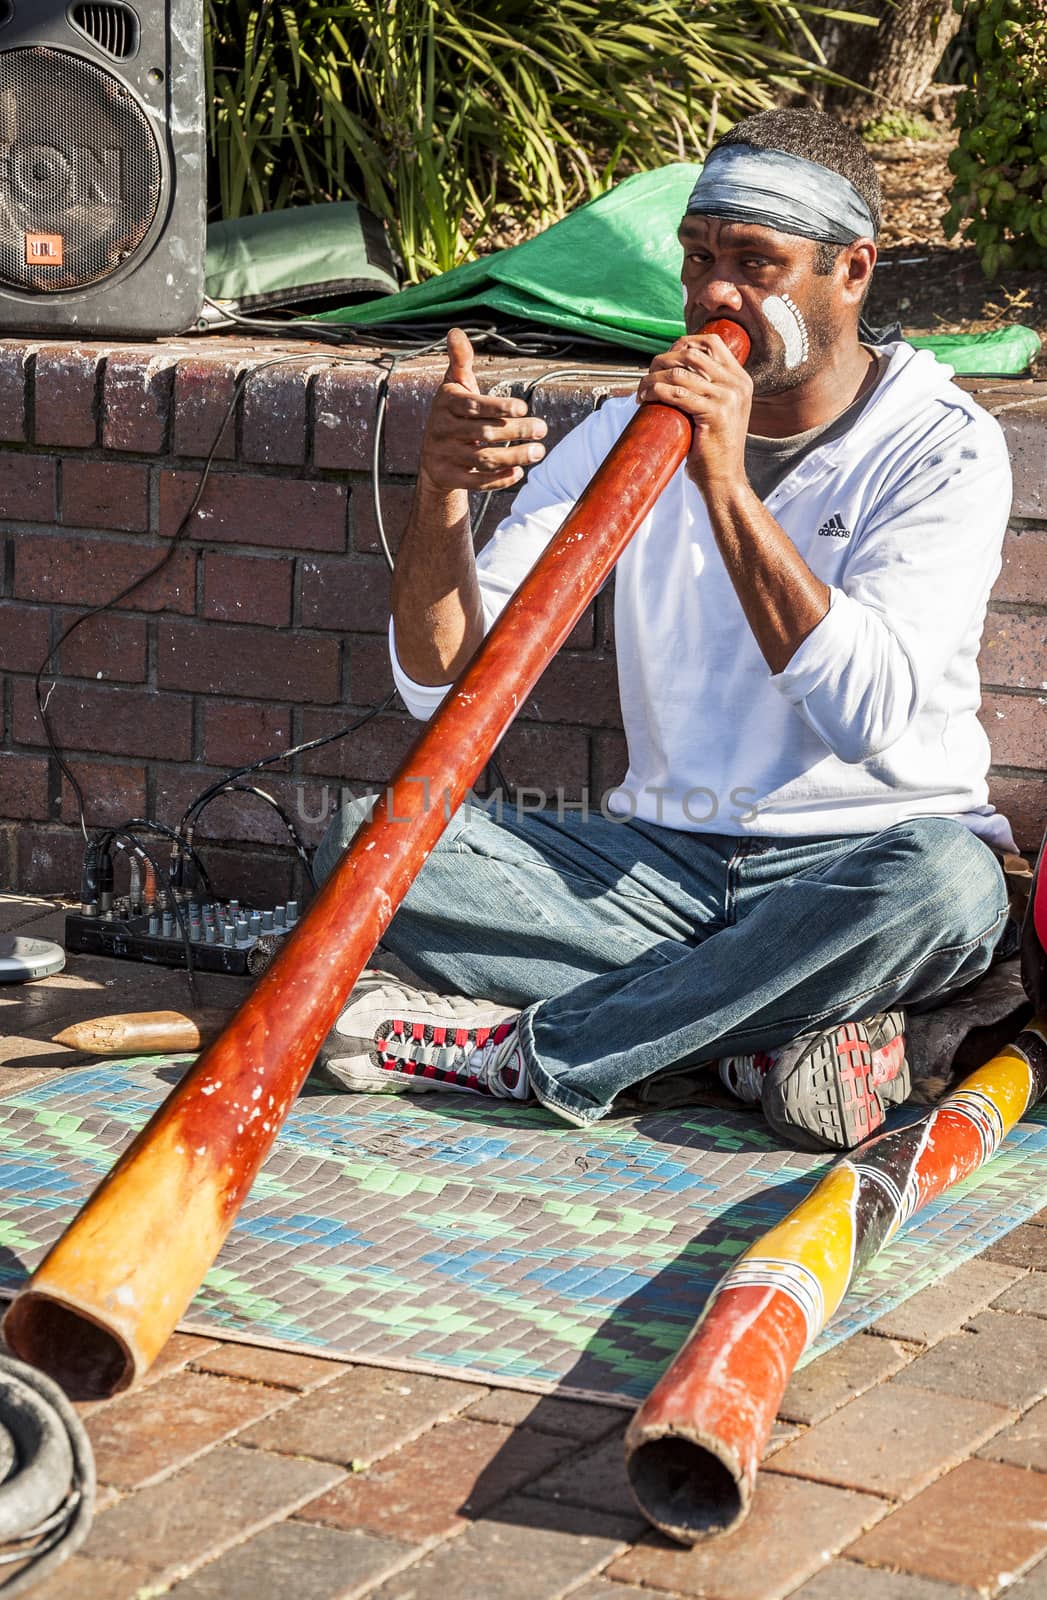 SYDNEY - AUGUST 17: Aborigine musician play the traditional instrument on a street on August 17, 2010 in Sydney, Australia